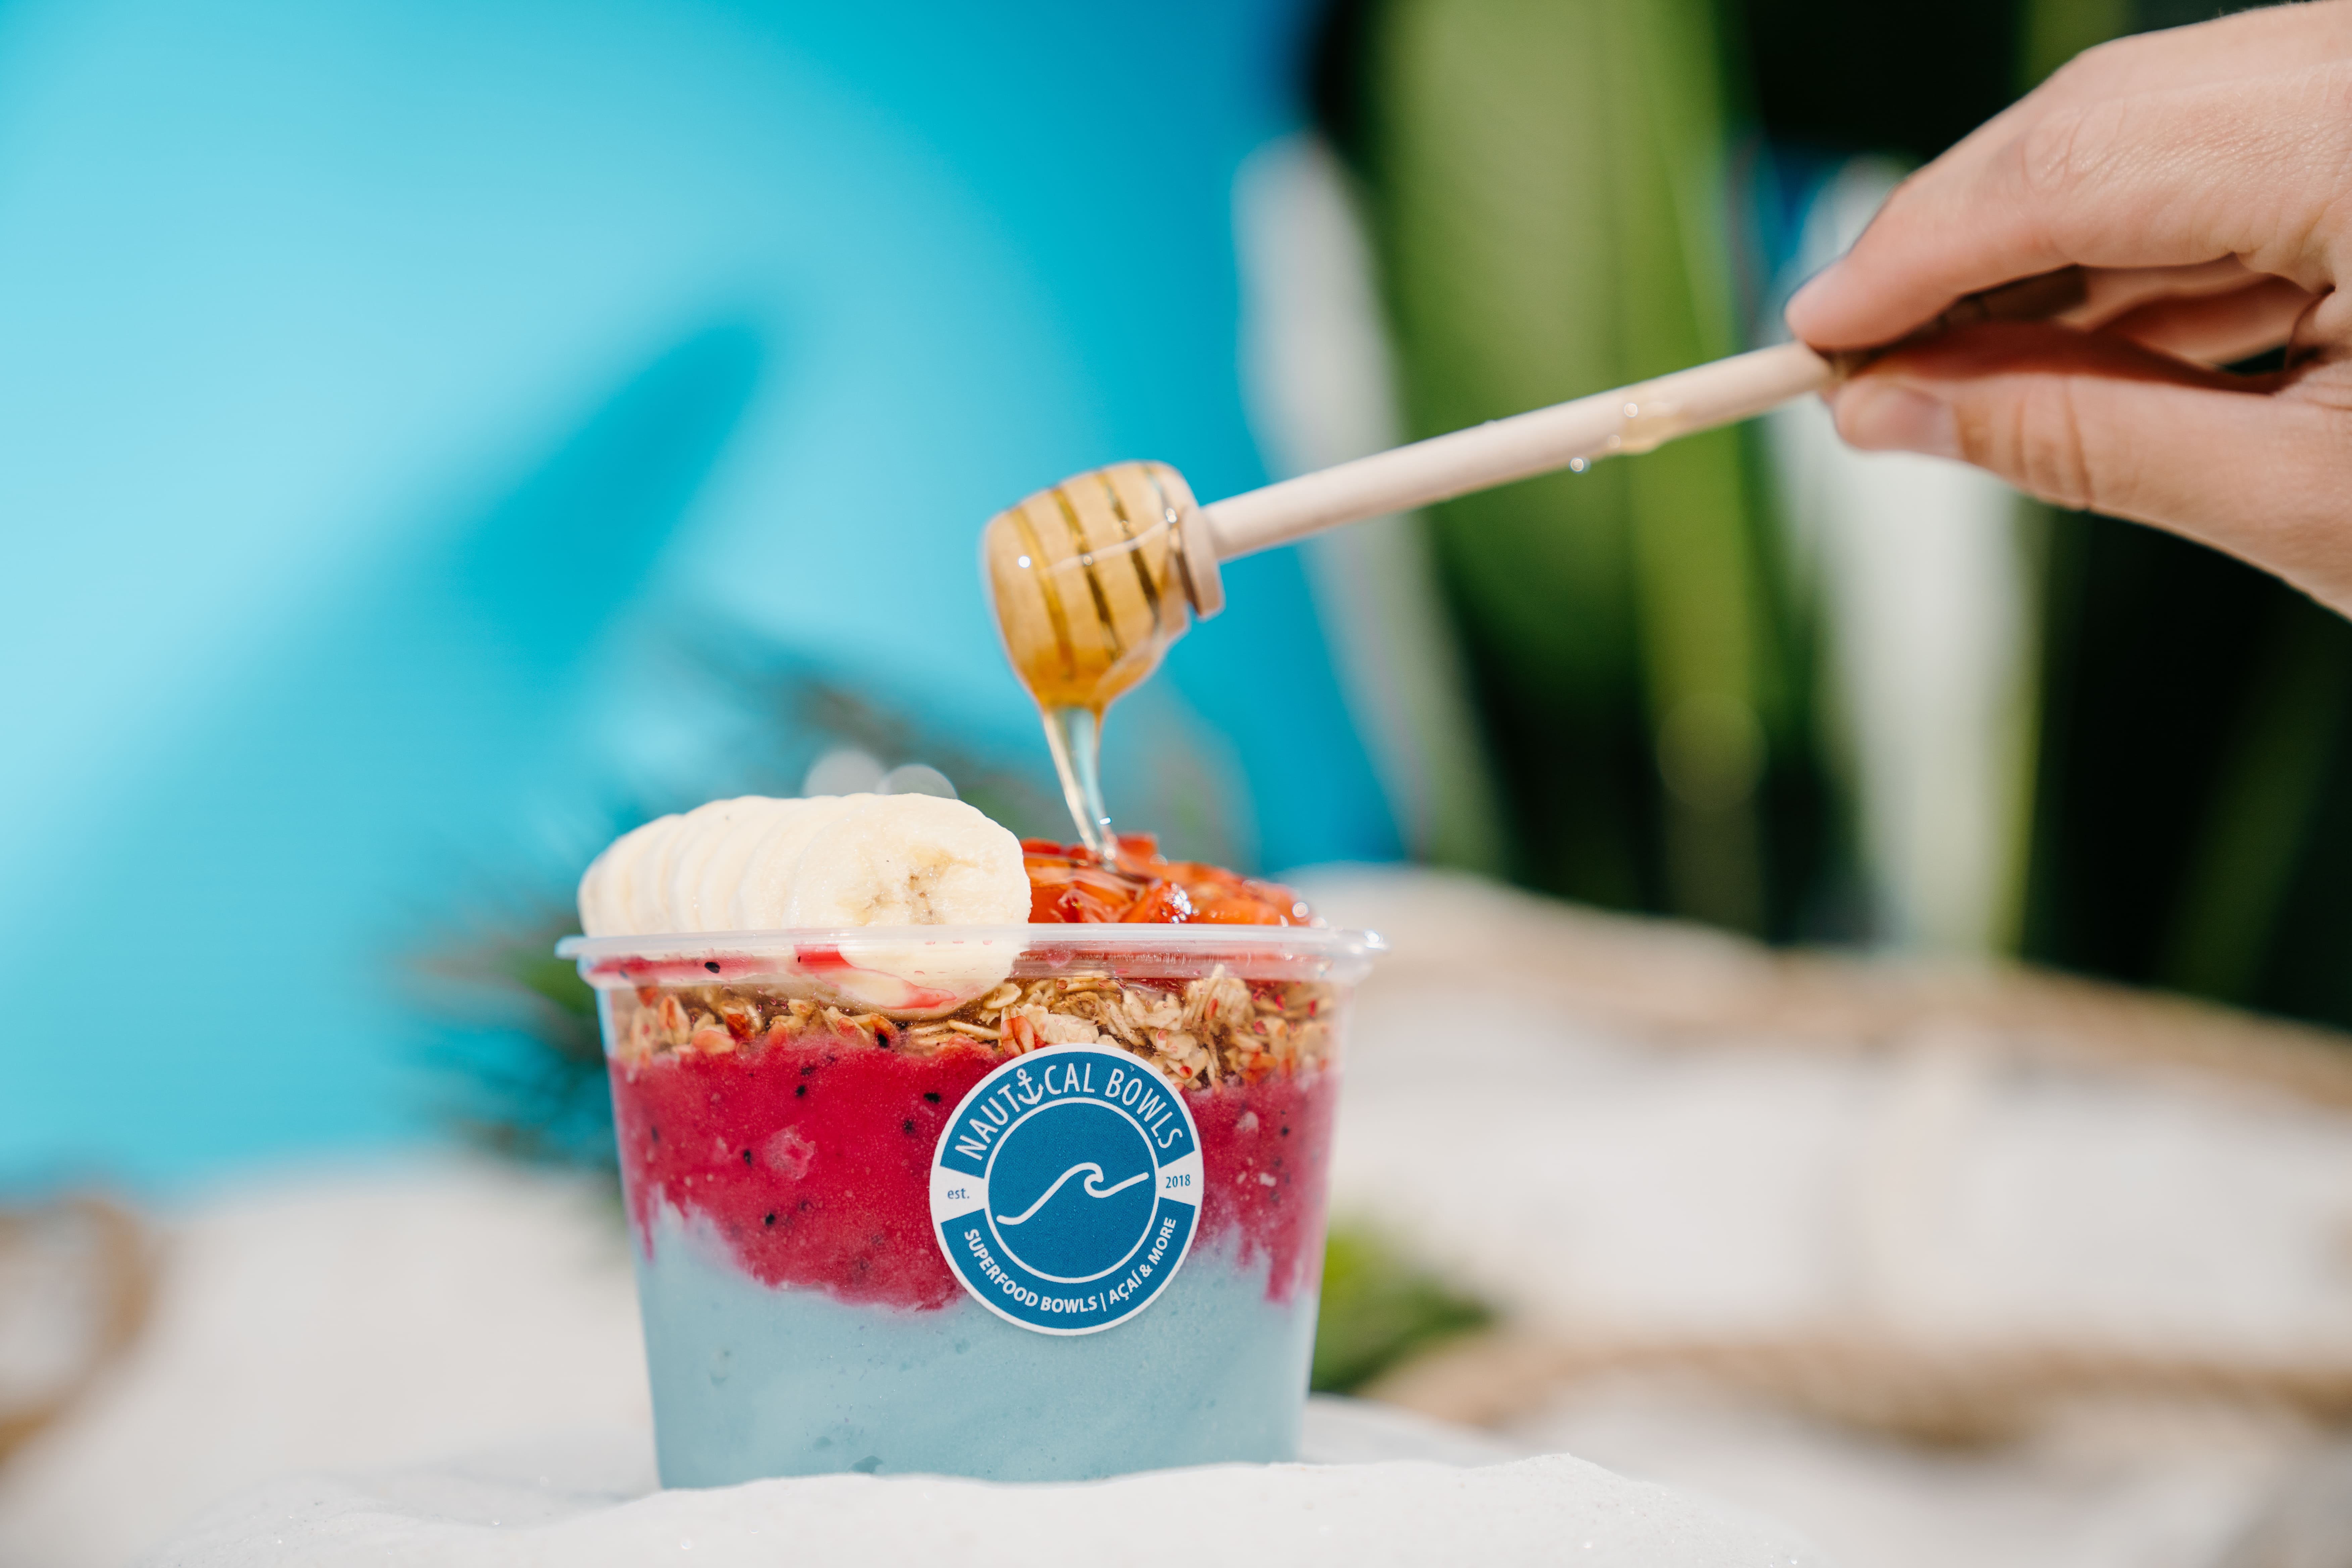 Dive into a world of flavor and nutrition with our Healthy Food! Savor the blend of fresh, antioxidant-rich acai berries, topped with a vibrant mix of fruits, nuts, and seeds, offering a perfect balance of nutrition and taste. Ideal for any meal, our bowls are a delicious commitment to your health journey.